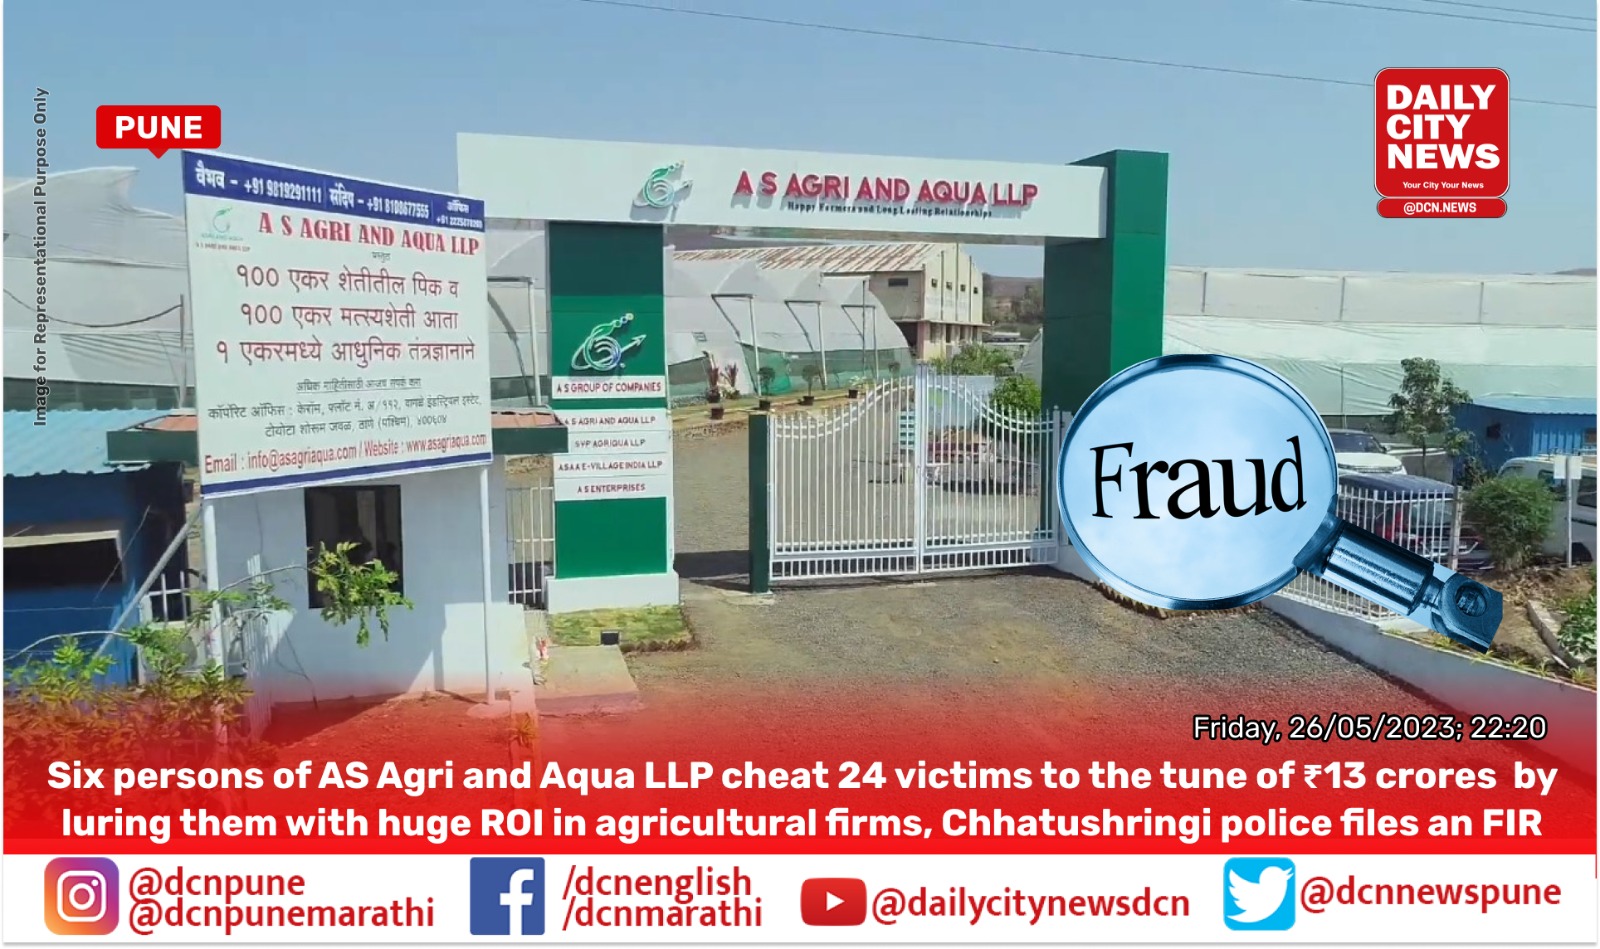 Six persons of AS Agri and Aqua LLP cheat 24 victims to the tune of ₹13 crores  by luring them with huge ROI in agricultural firms, Chhatushringi police files an FIR 